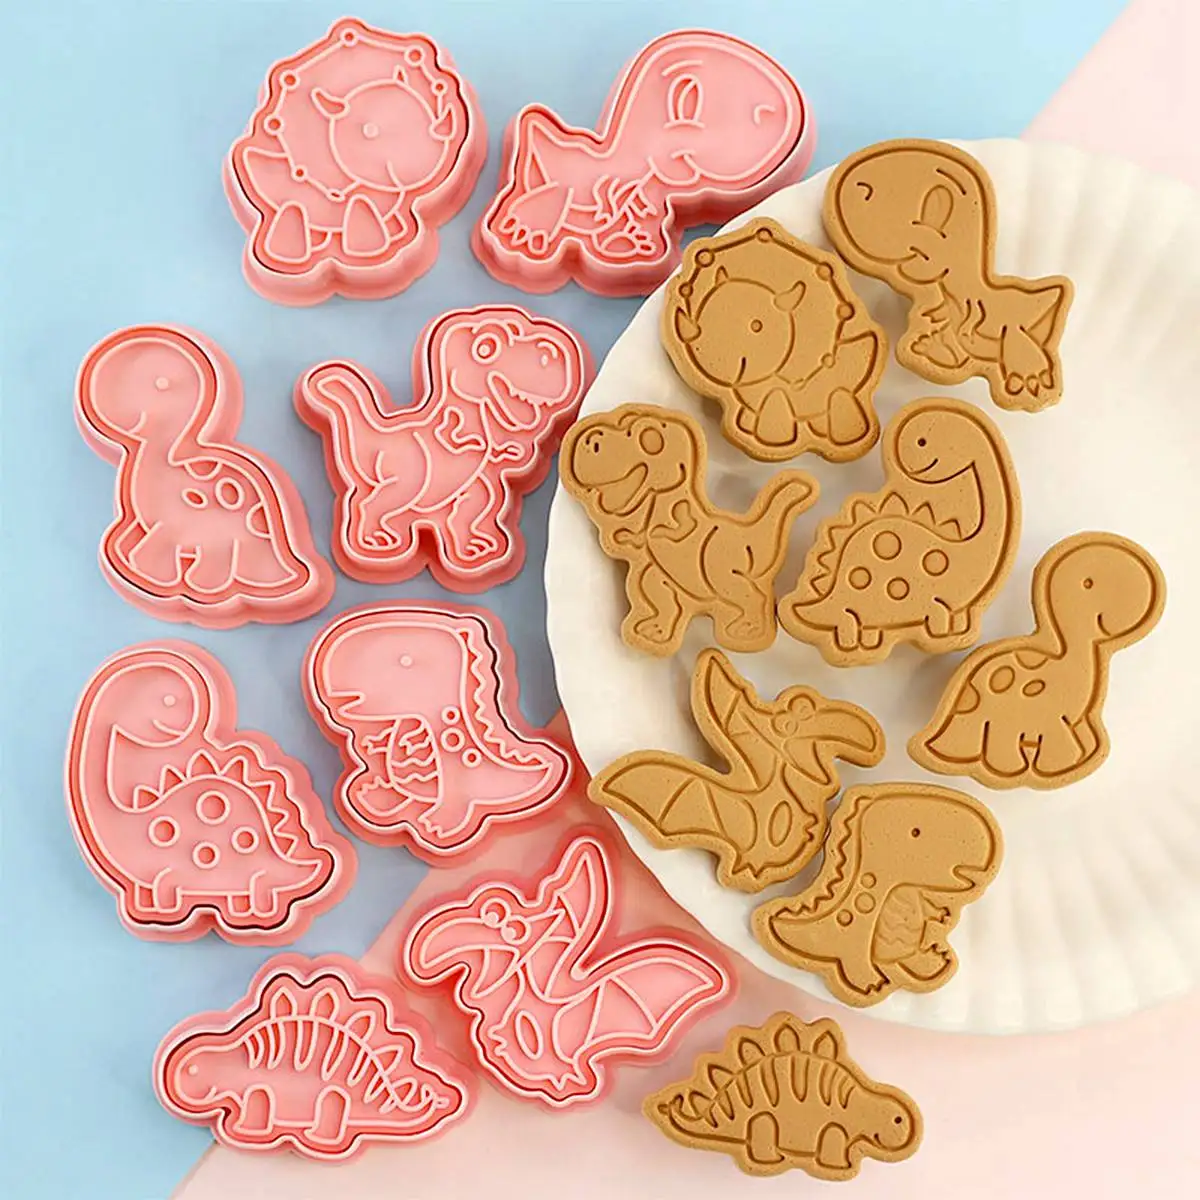 

8pcs/set Cookie Cutters Animal Dinosaur Type Stamp Embosser for Biscuit Pastry Bakeware Baking Cookies Molds Kitchen Accessories